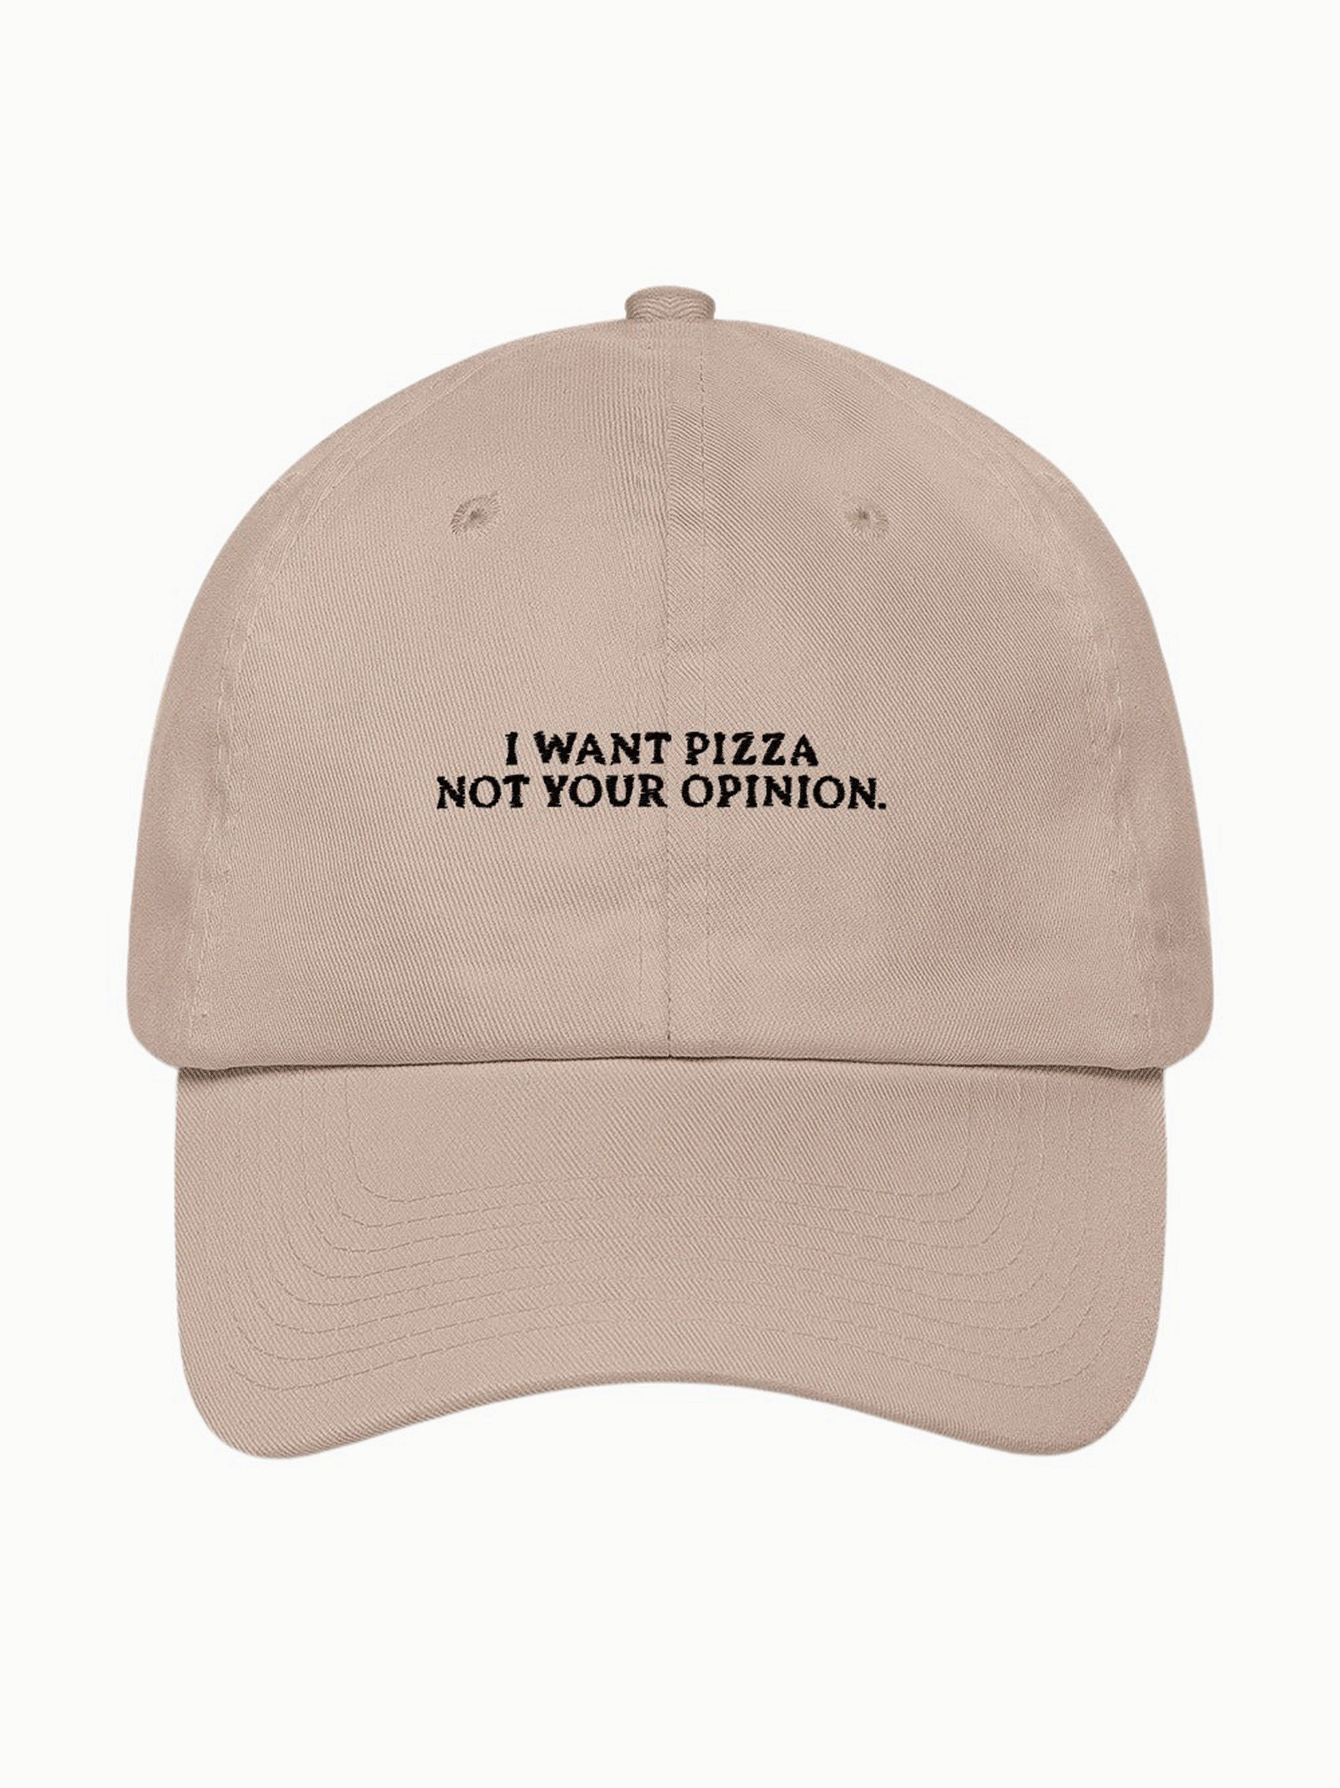 I Want Pizza Not Your Opinion Cap